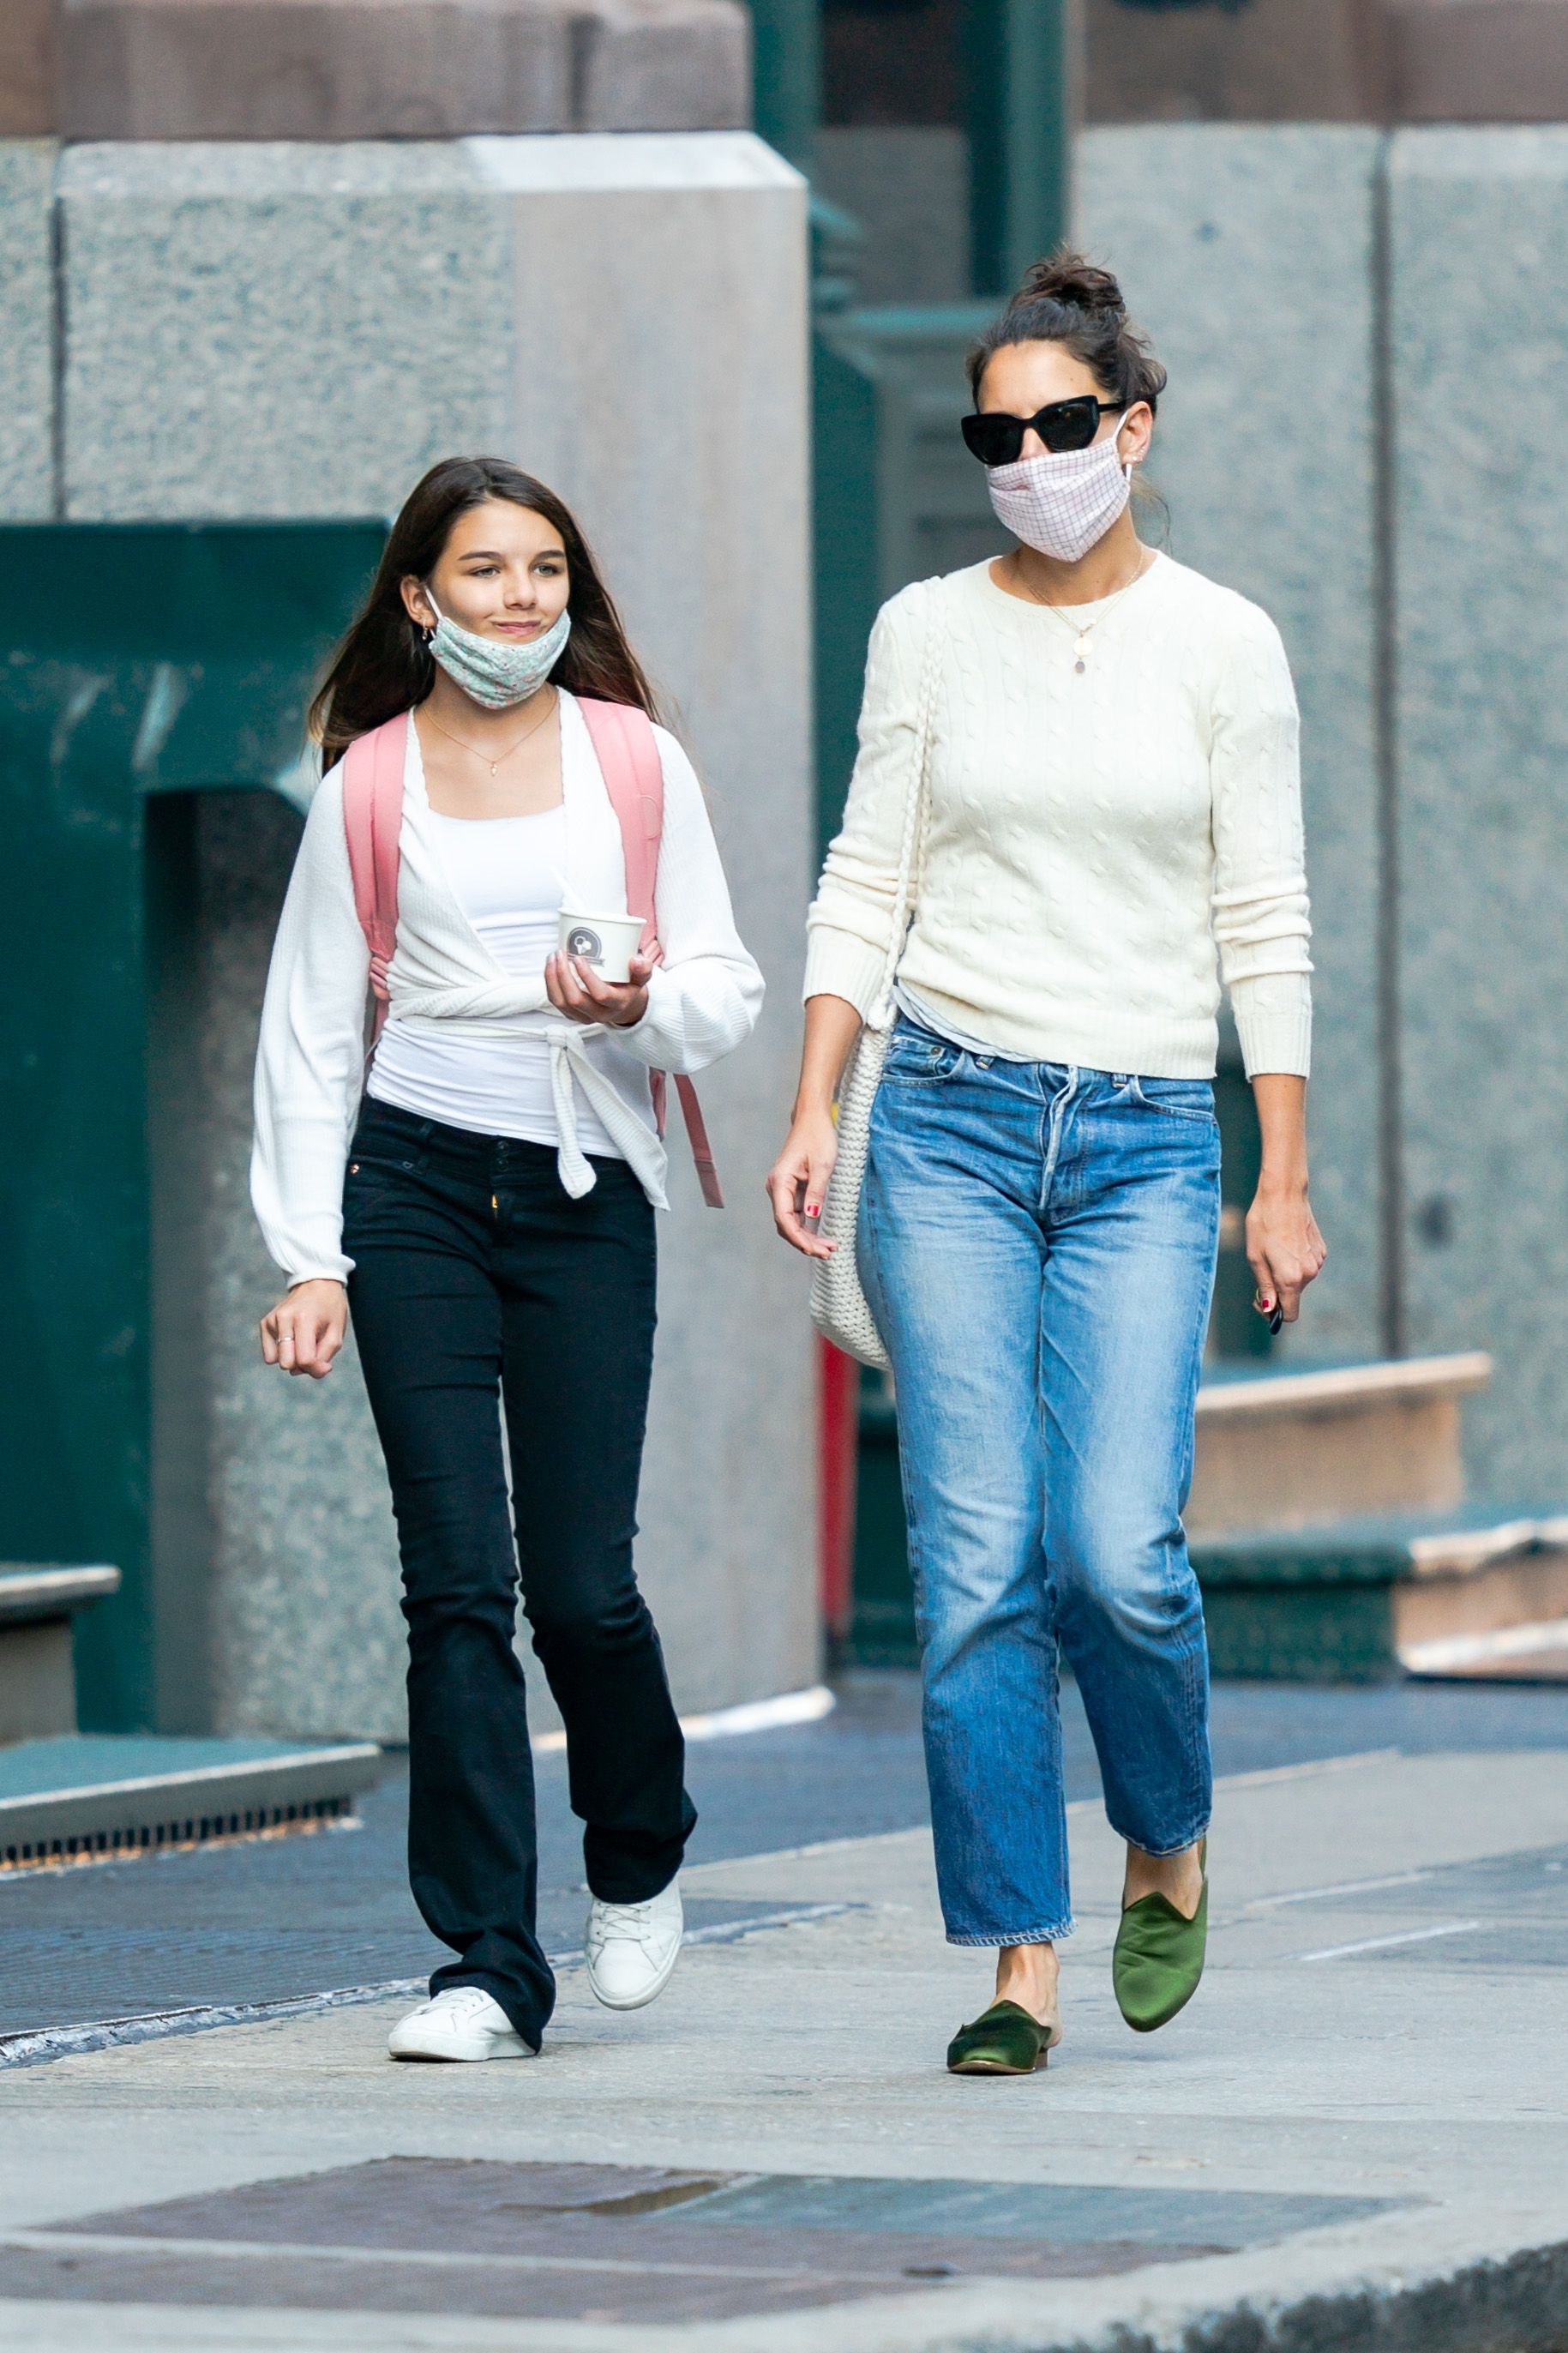 Suri Cruise and Katie Holmes in New York City on September 8, 2020 | Source: Getty Images